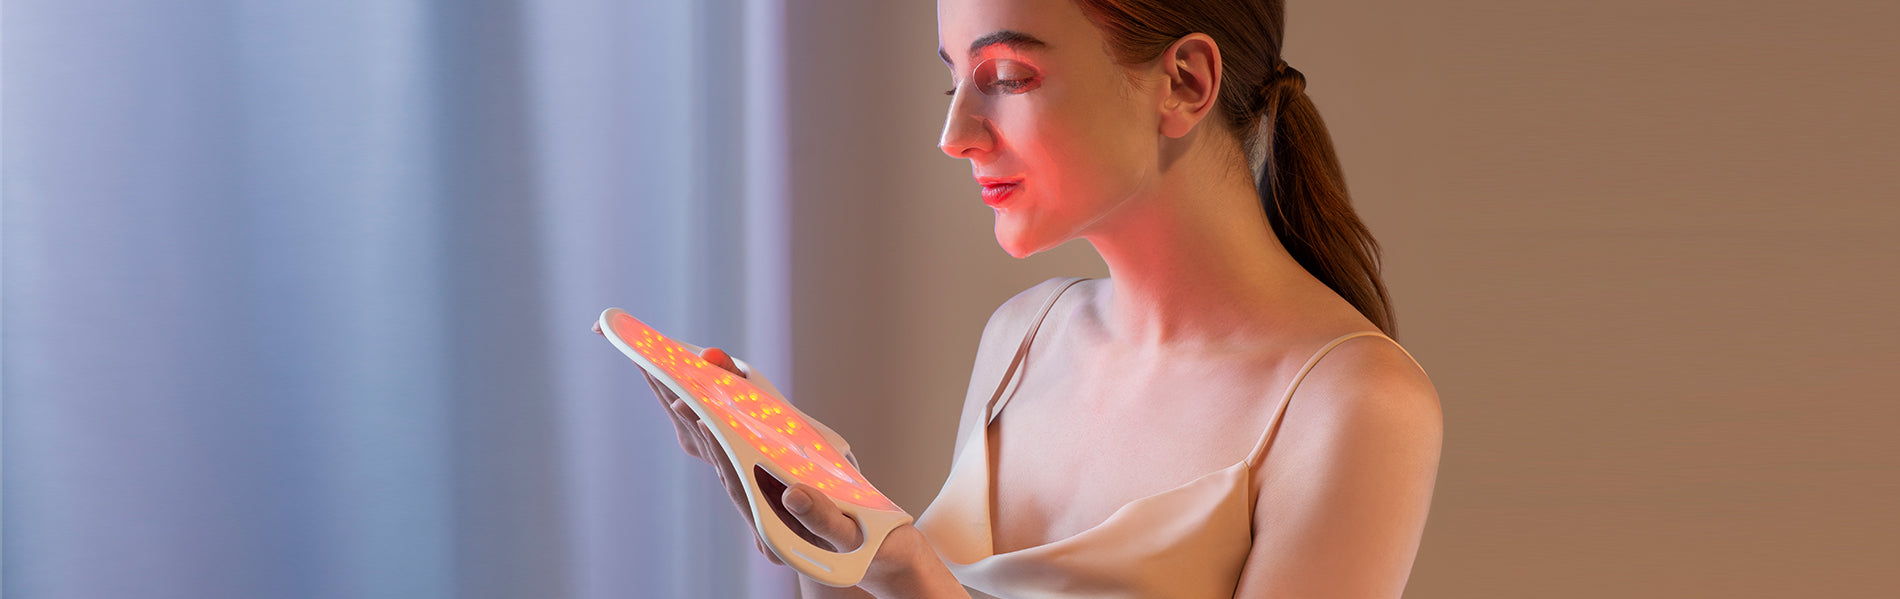 Red LED Light Therapy & Retinol: Is It A Safe And Effective Match?